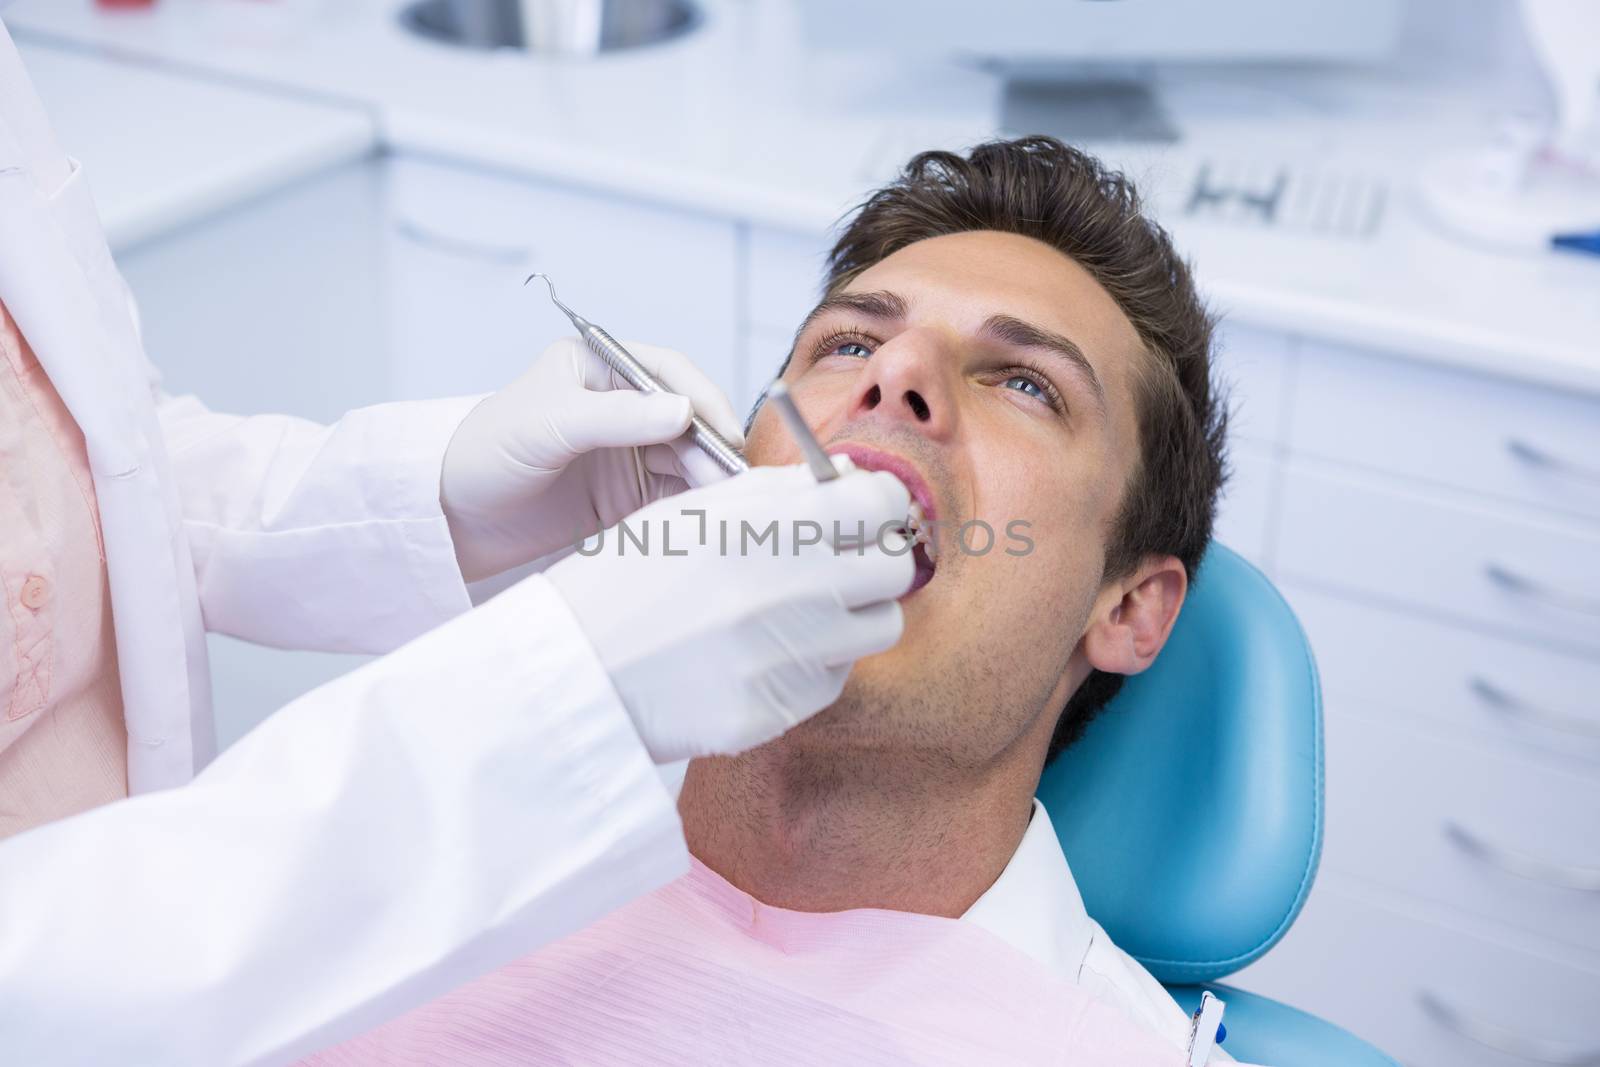 Dentist holding medical equipment while giving treatment to man by Wavebreakmedia